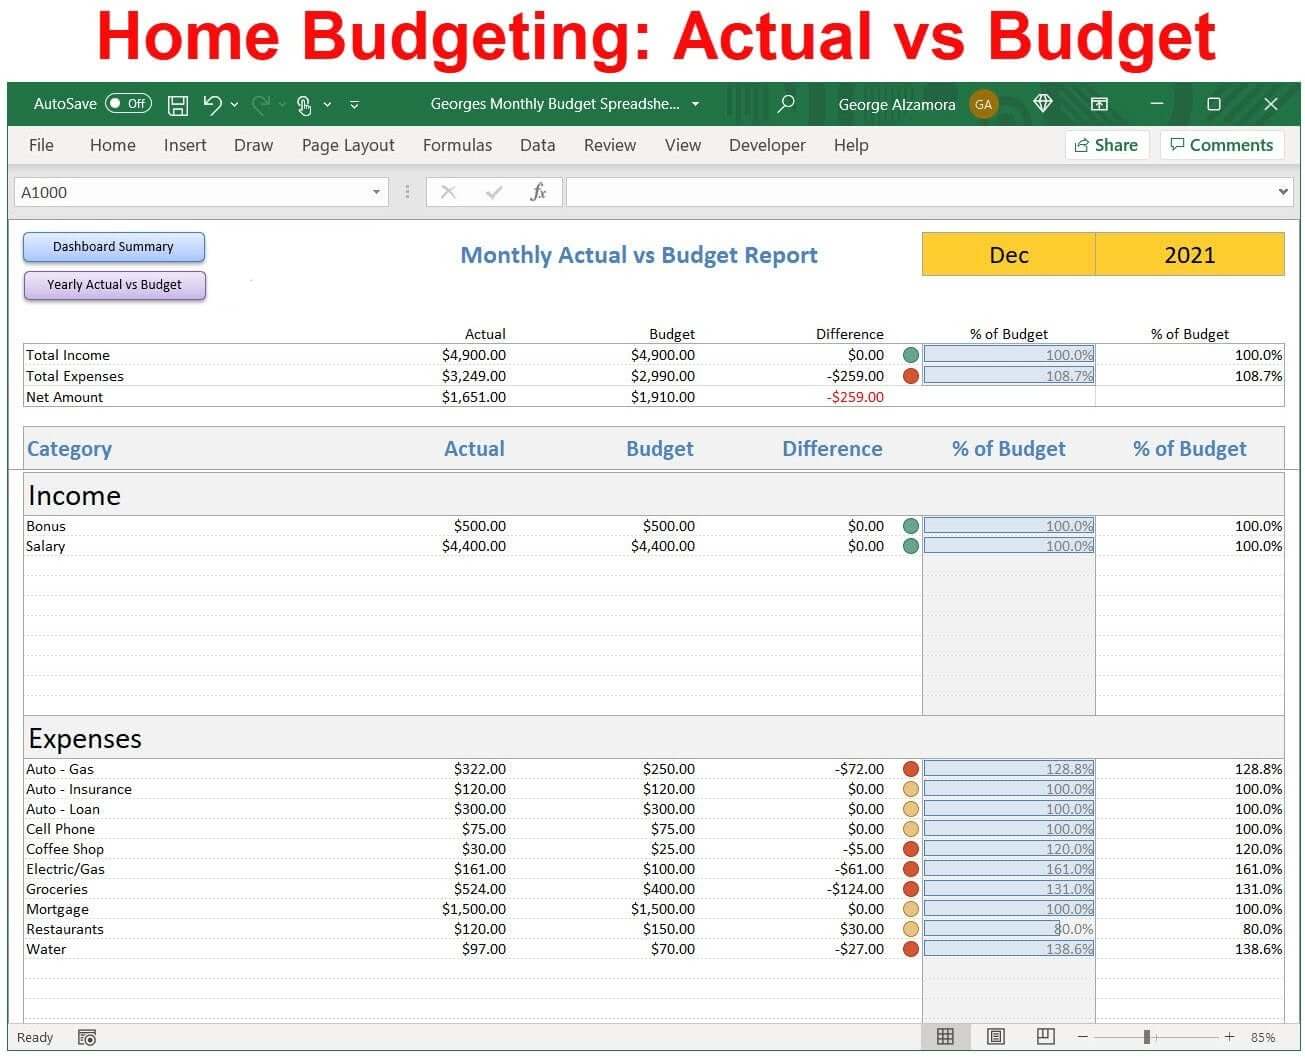 How to create a home budget in Excel